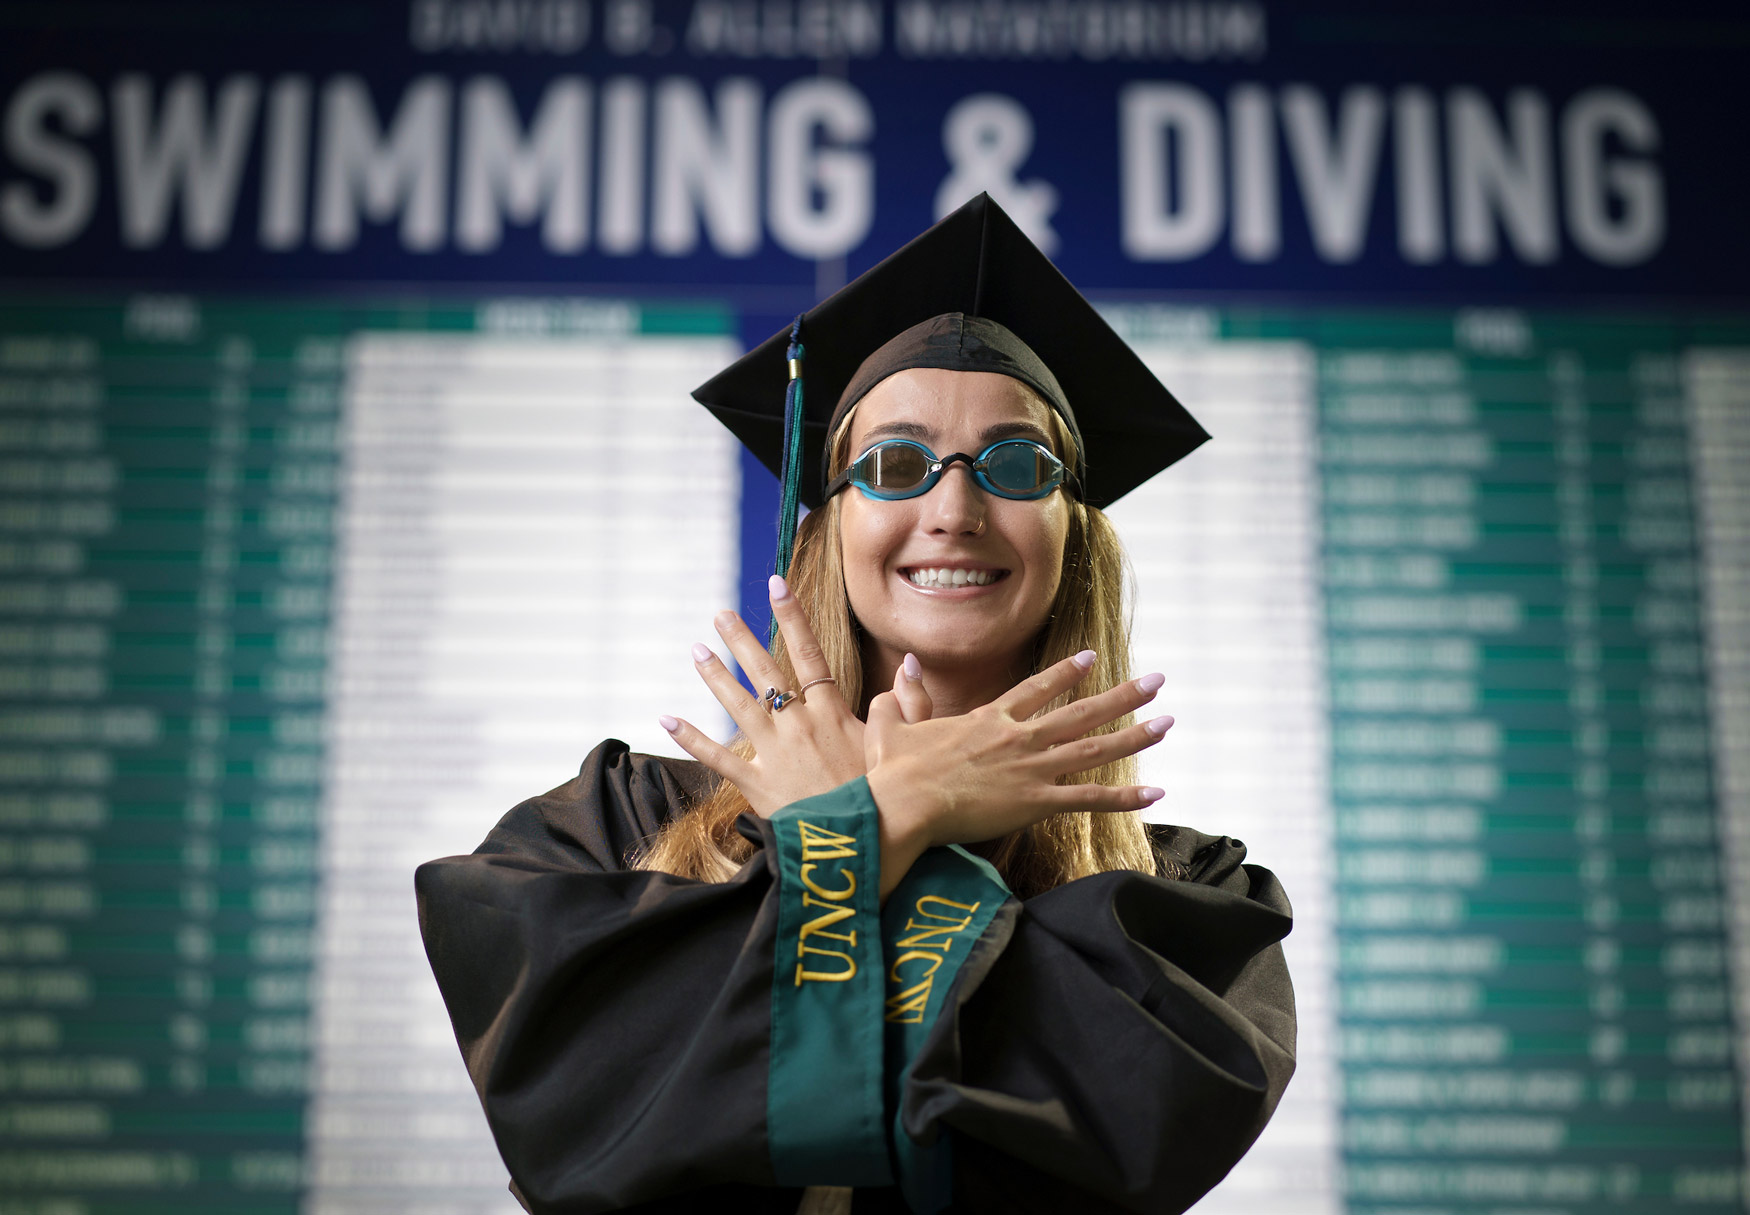 Sarah Olson discovered her love for competitive swimming through her local YMCA, club and high school teams.